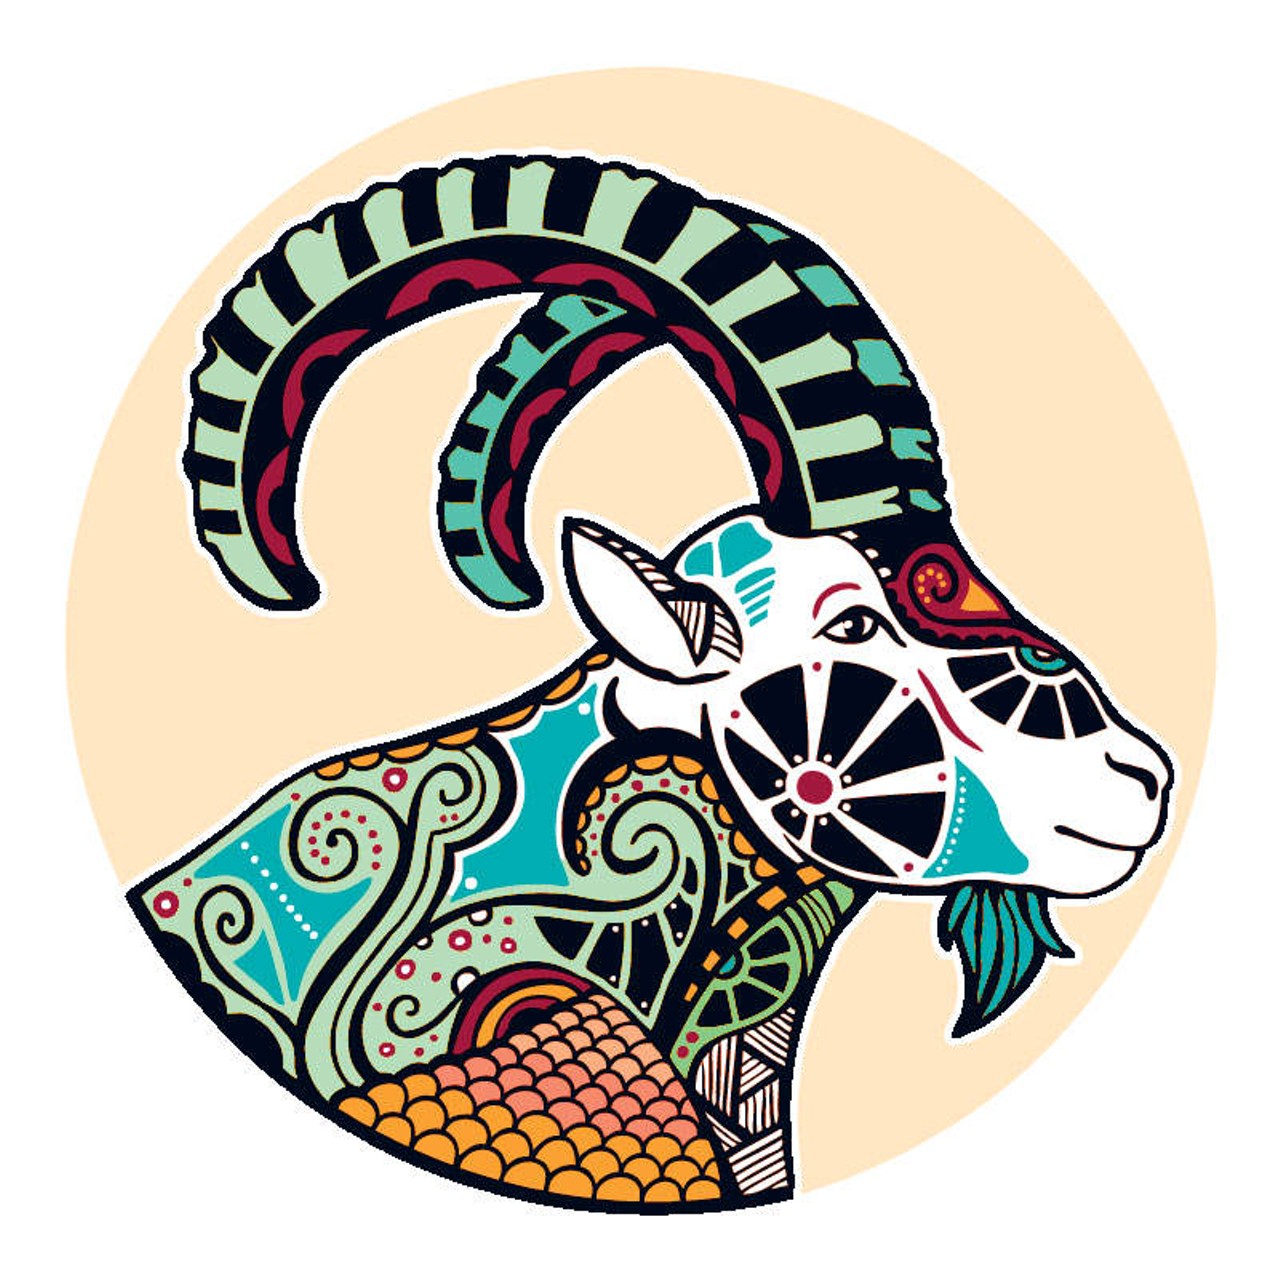 CAPRICORN (Dec. 21-Jan. 20): 
If it isn&#146;t one thing it&#146;s another. You are no stranger to chaos. What&#146;s great about this stretch of craziness is; it isn&#146;t anything you haven&#146;t seen before. In and around a few weeks of interference the long-term picture is looking better than ever. For some reason whoever&#146;s in charge is happy with the way you do things, and your spirits are higher than they&#146;ve been in a while. Thankfully you&#146;re never one to let false confidence get the best of you. If you can remain true to yourself and the task at hand, everything that you&#146;ve built up will carry you to the finish line.